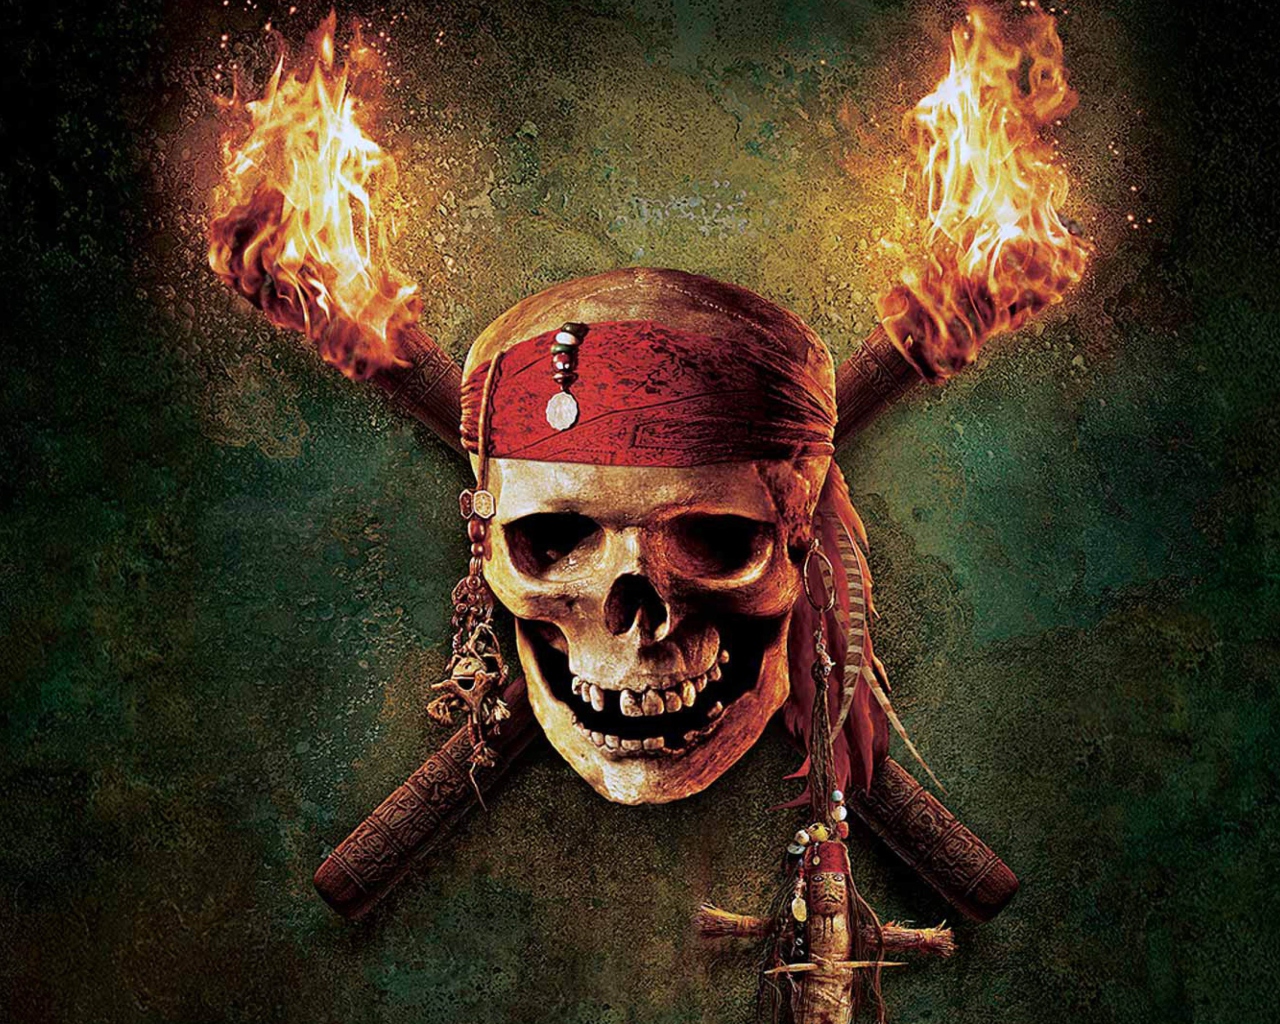 Pirates Of The Caribbean wallpaper 1280x1024